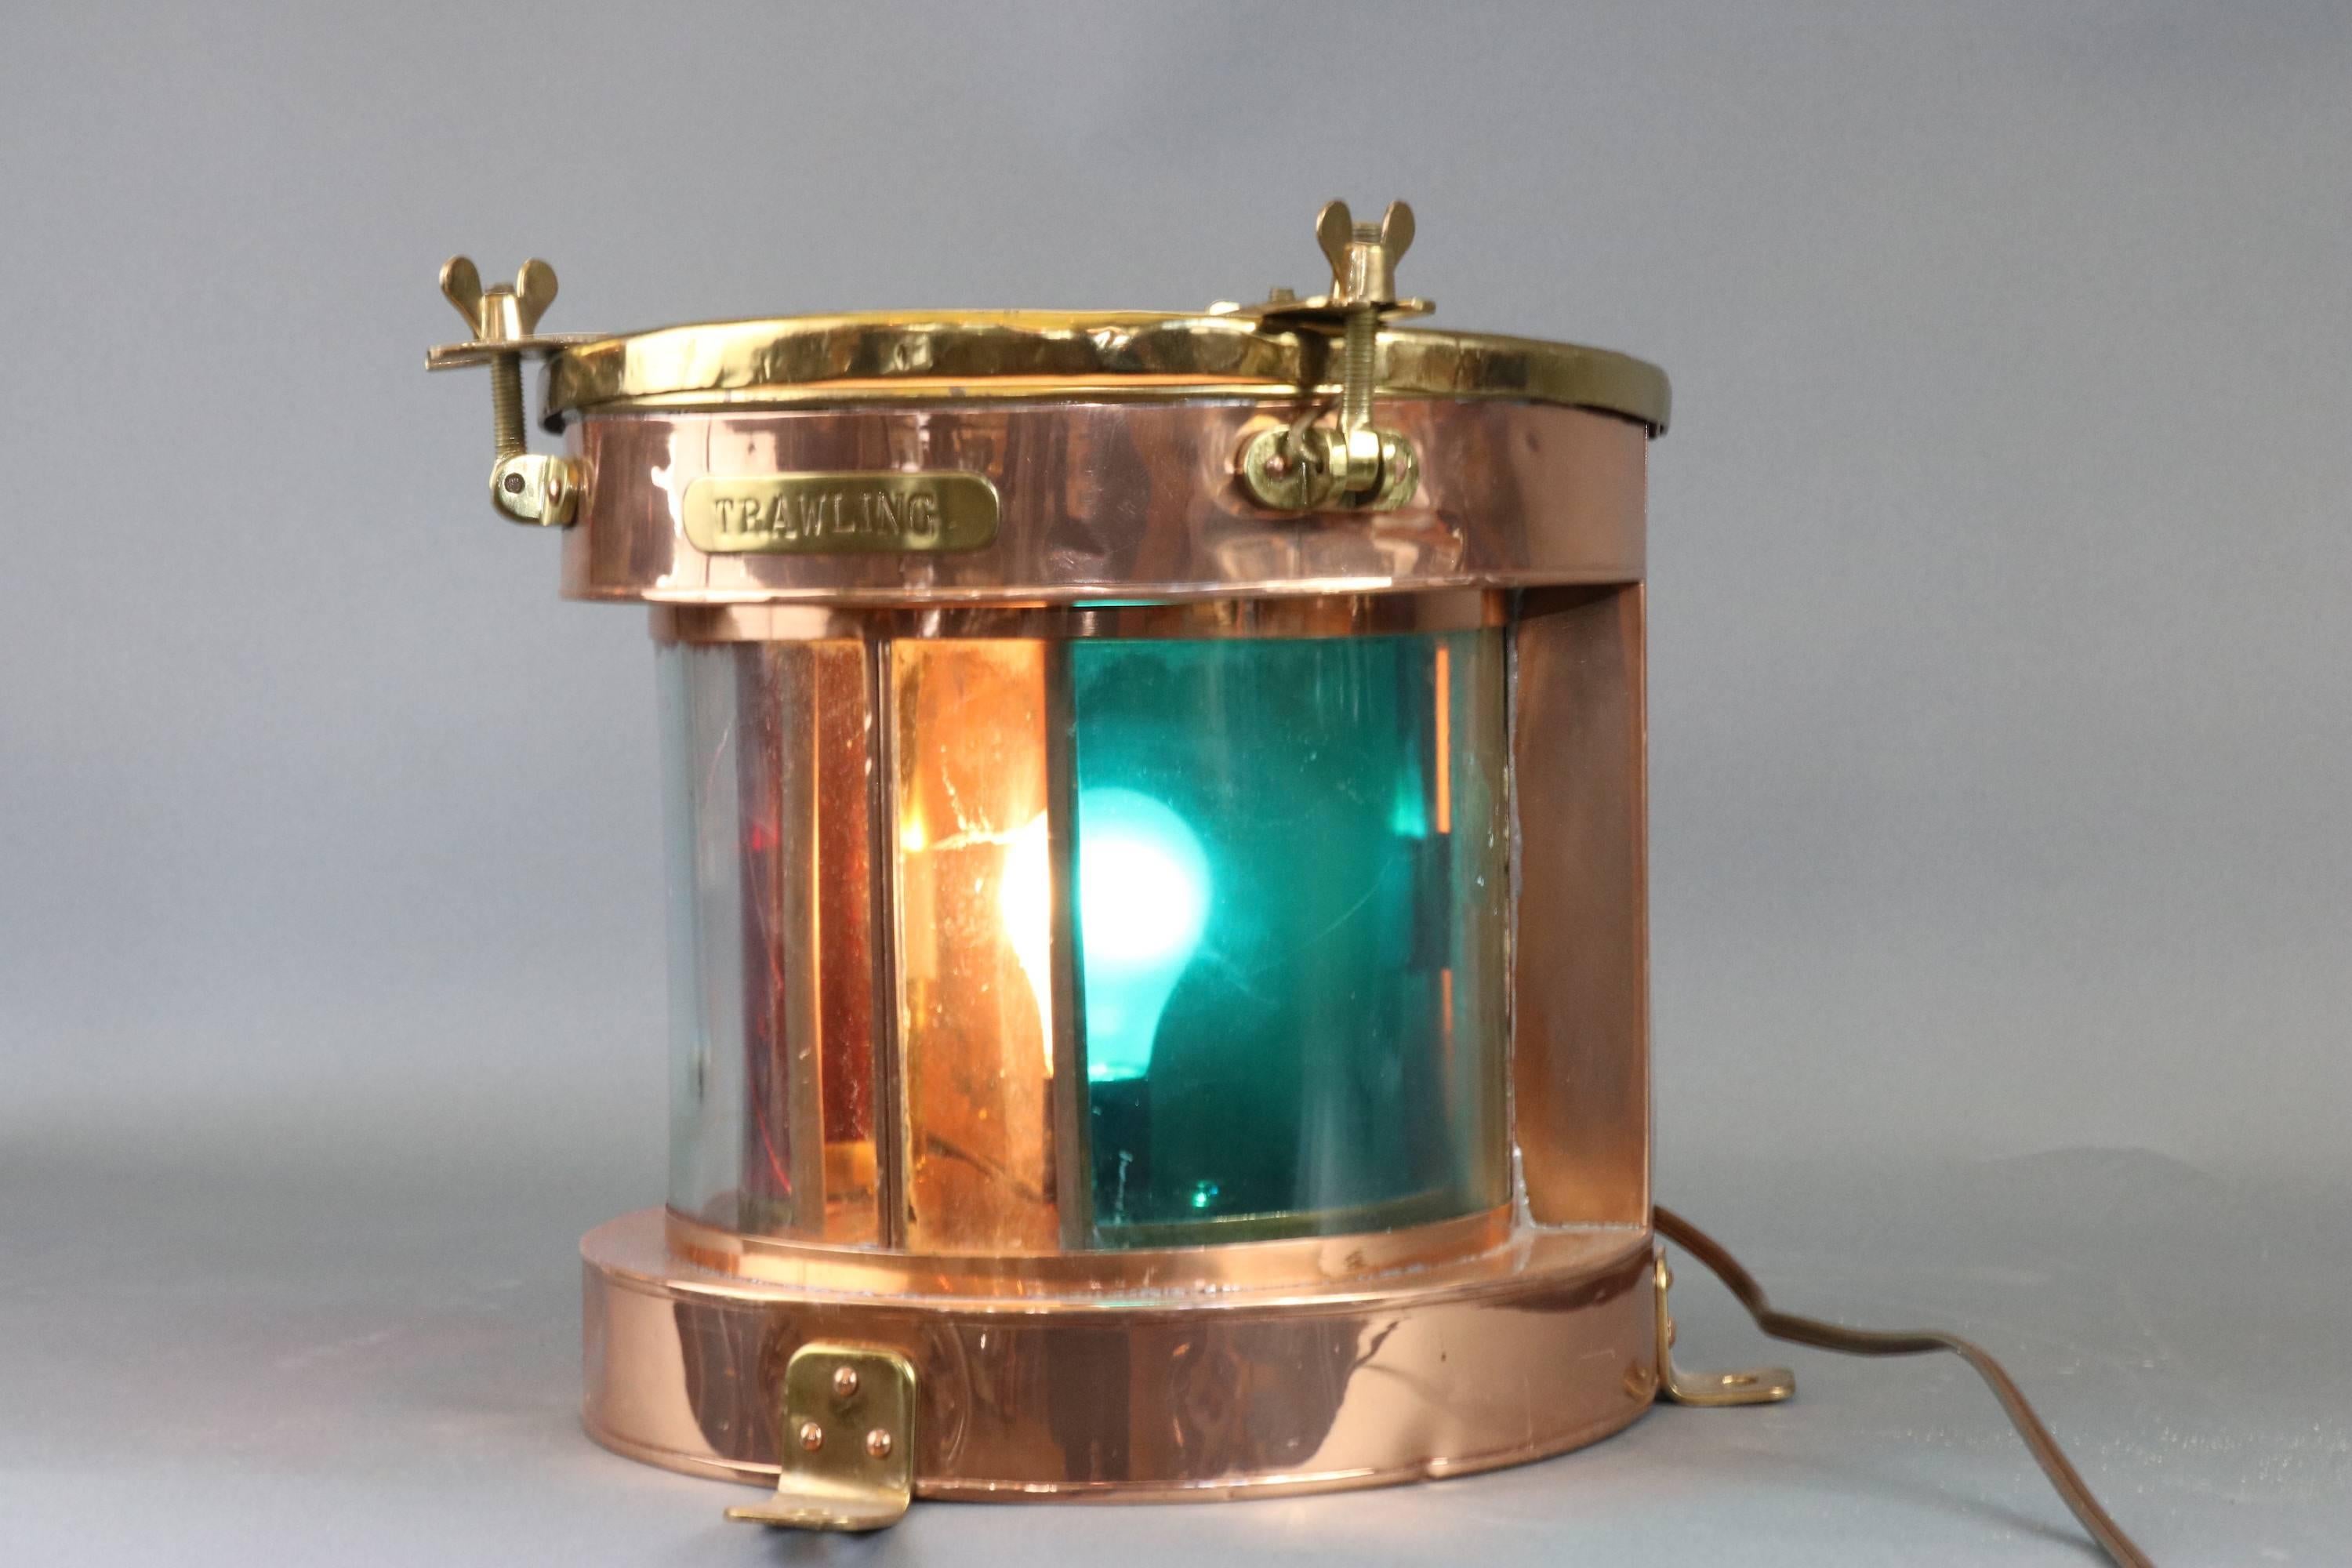 Rare copper and brass ship's trawling lantern. Copper housing with brass top, curved glass front lens with sliding internal filters of red and green. Red filter is cracked. 

12 x 12 x 10 1/2" high